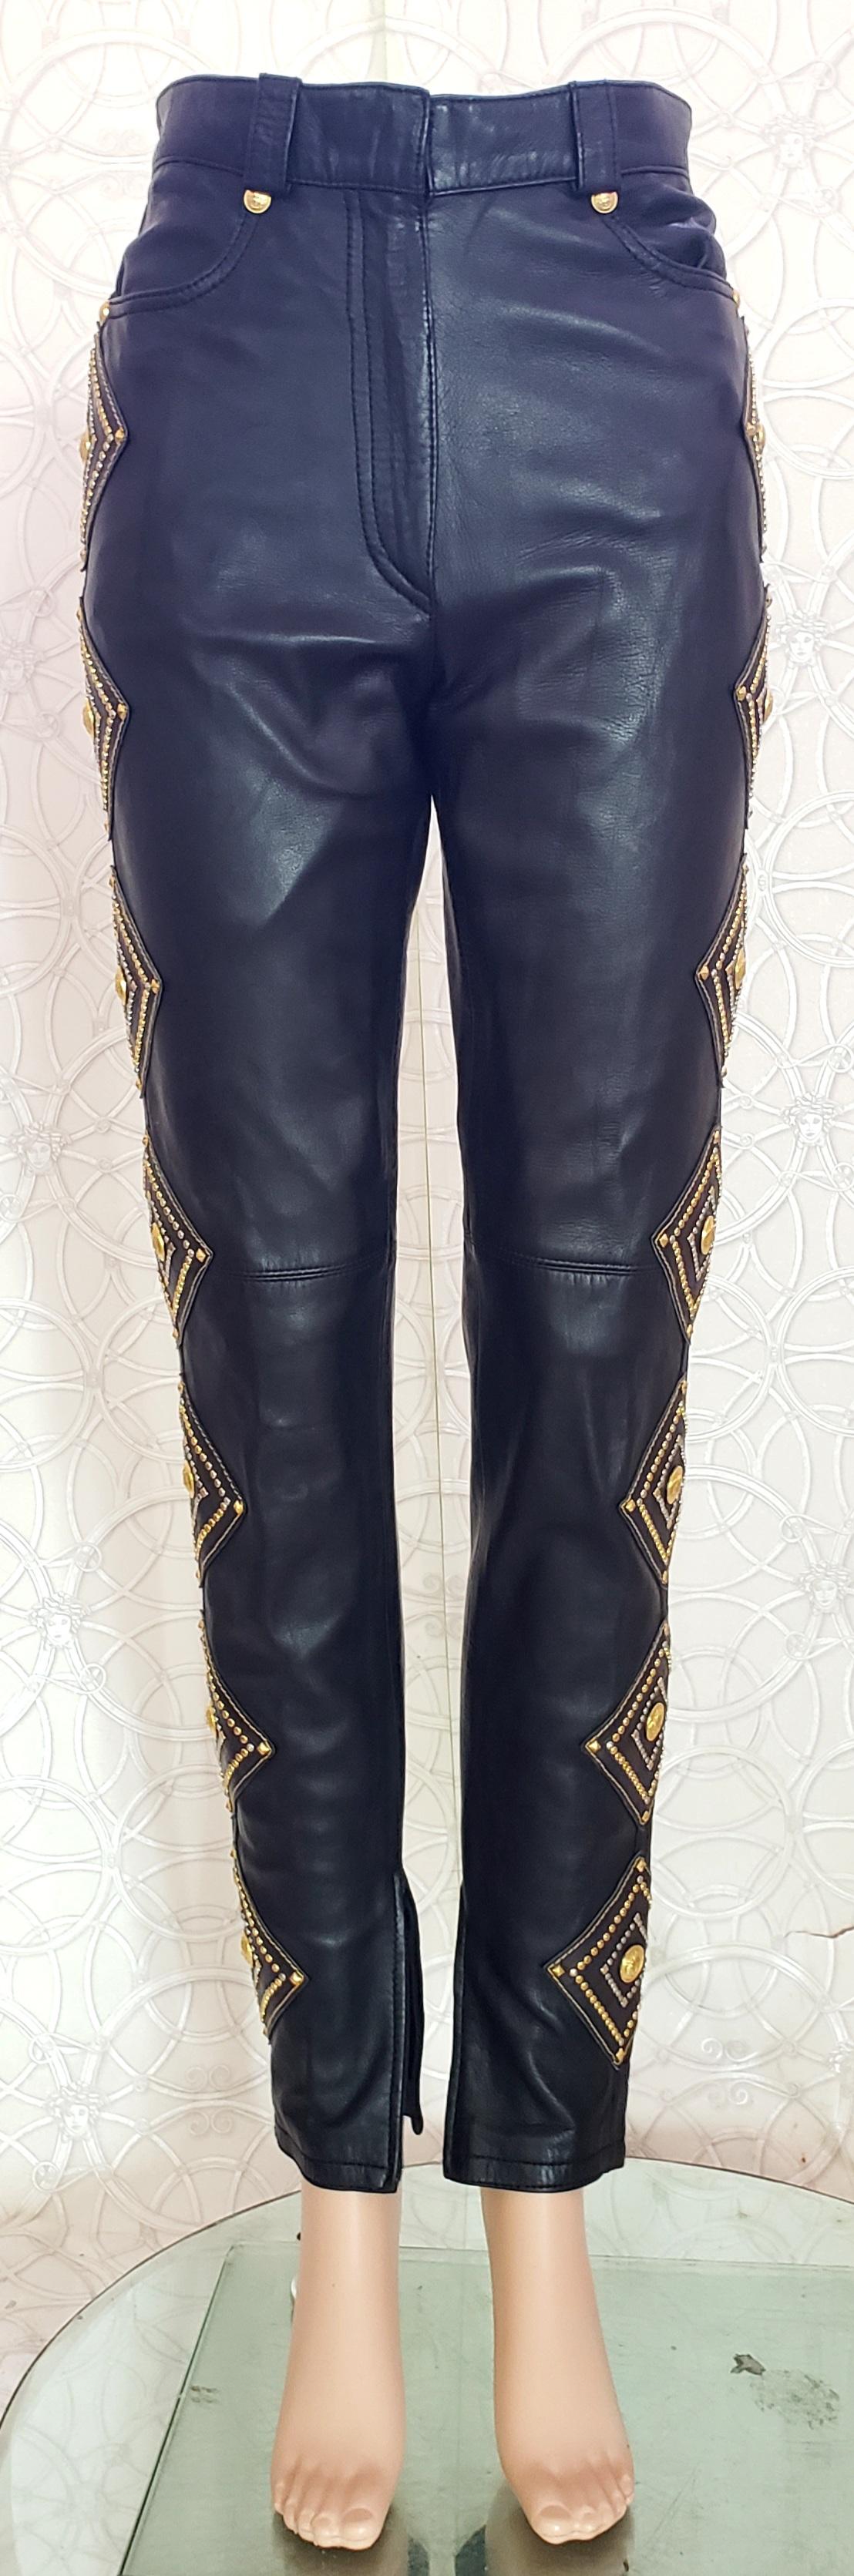 1991 GIANNI VERSACE PRIVATE MUSEUM WORTHY COLLECTION BLACK LEATHER STUDDED Pants In New Condition For Sale In Montgomery, TX